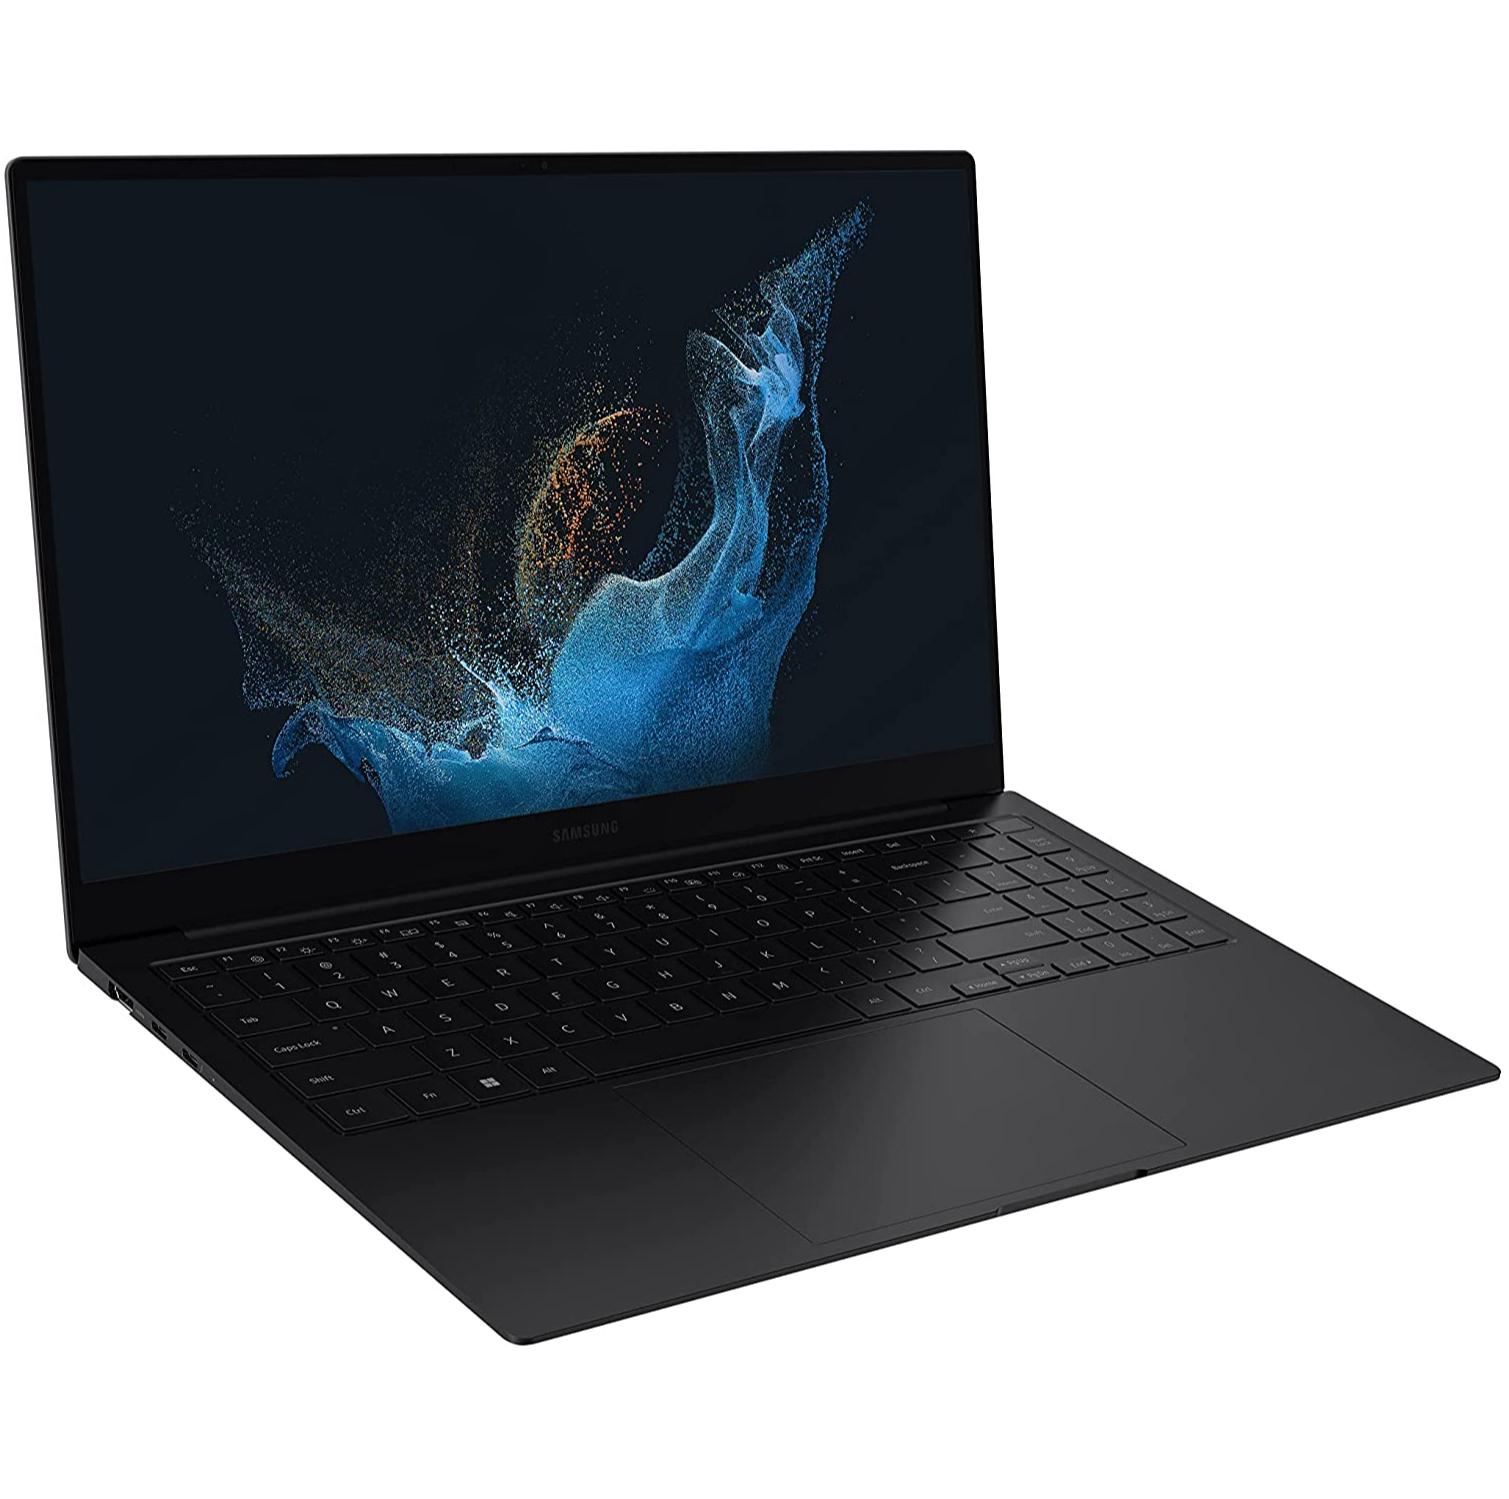 Samsung Galaxy Book2 Pro laptop on a white background